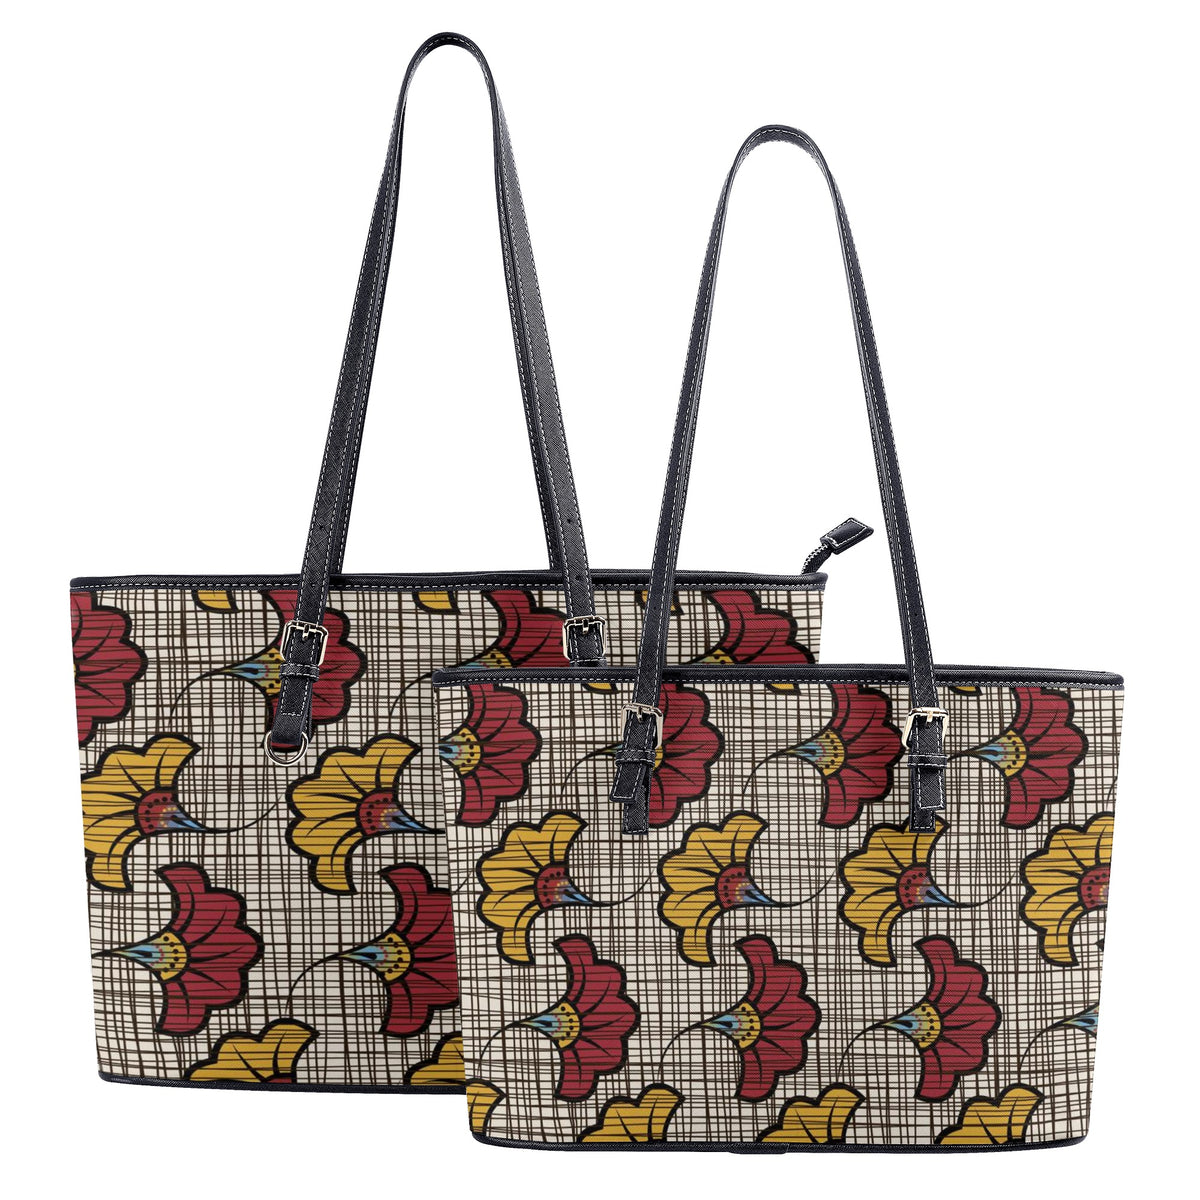 Leather Tote Bags in African Ankara Prints Popcustoms